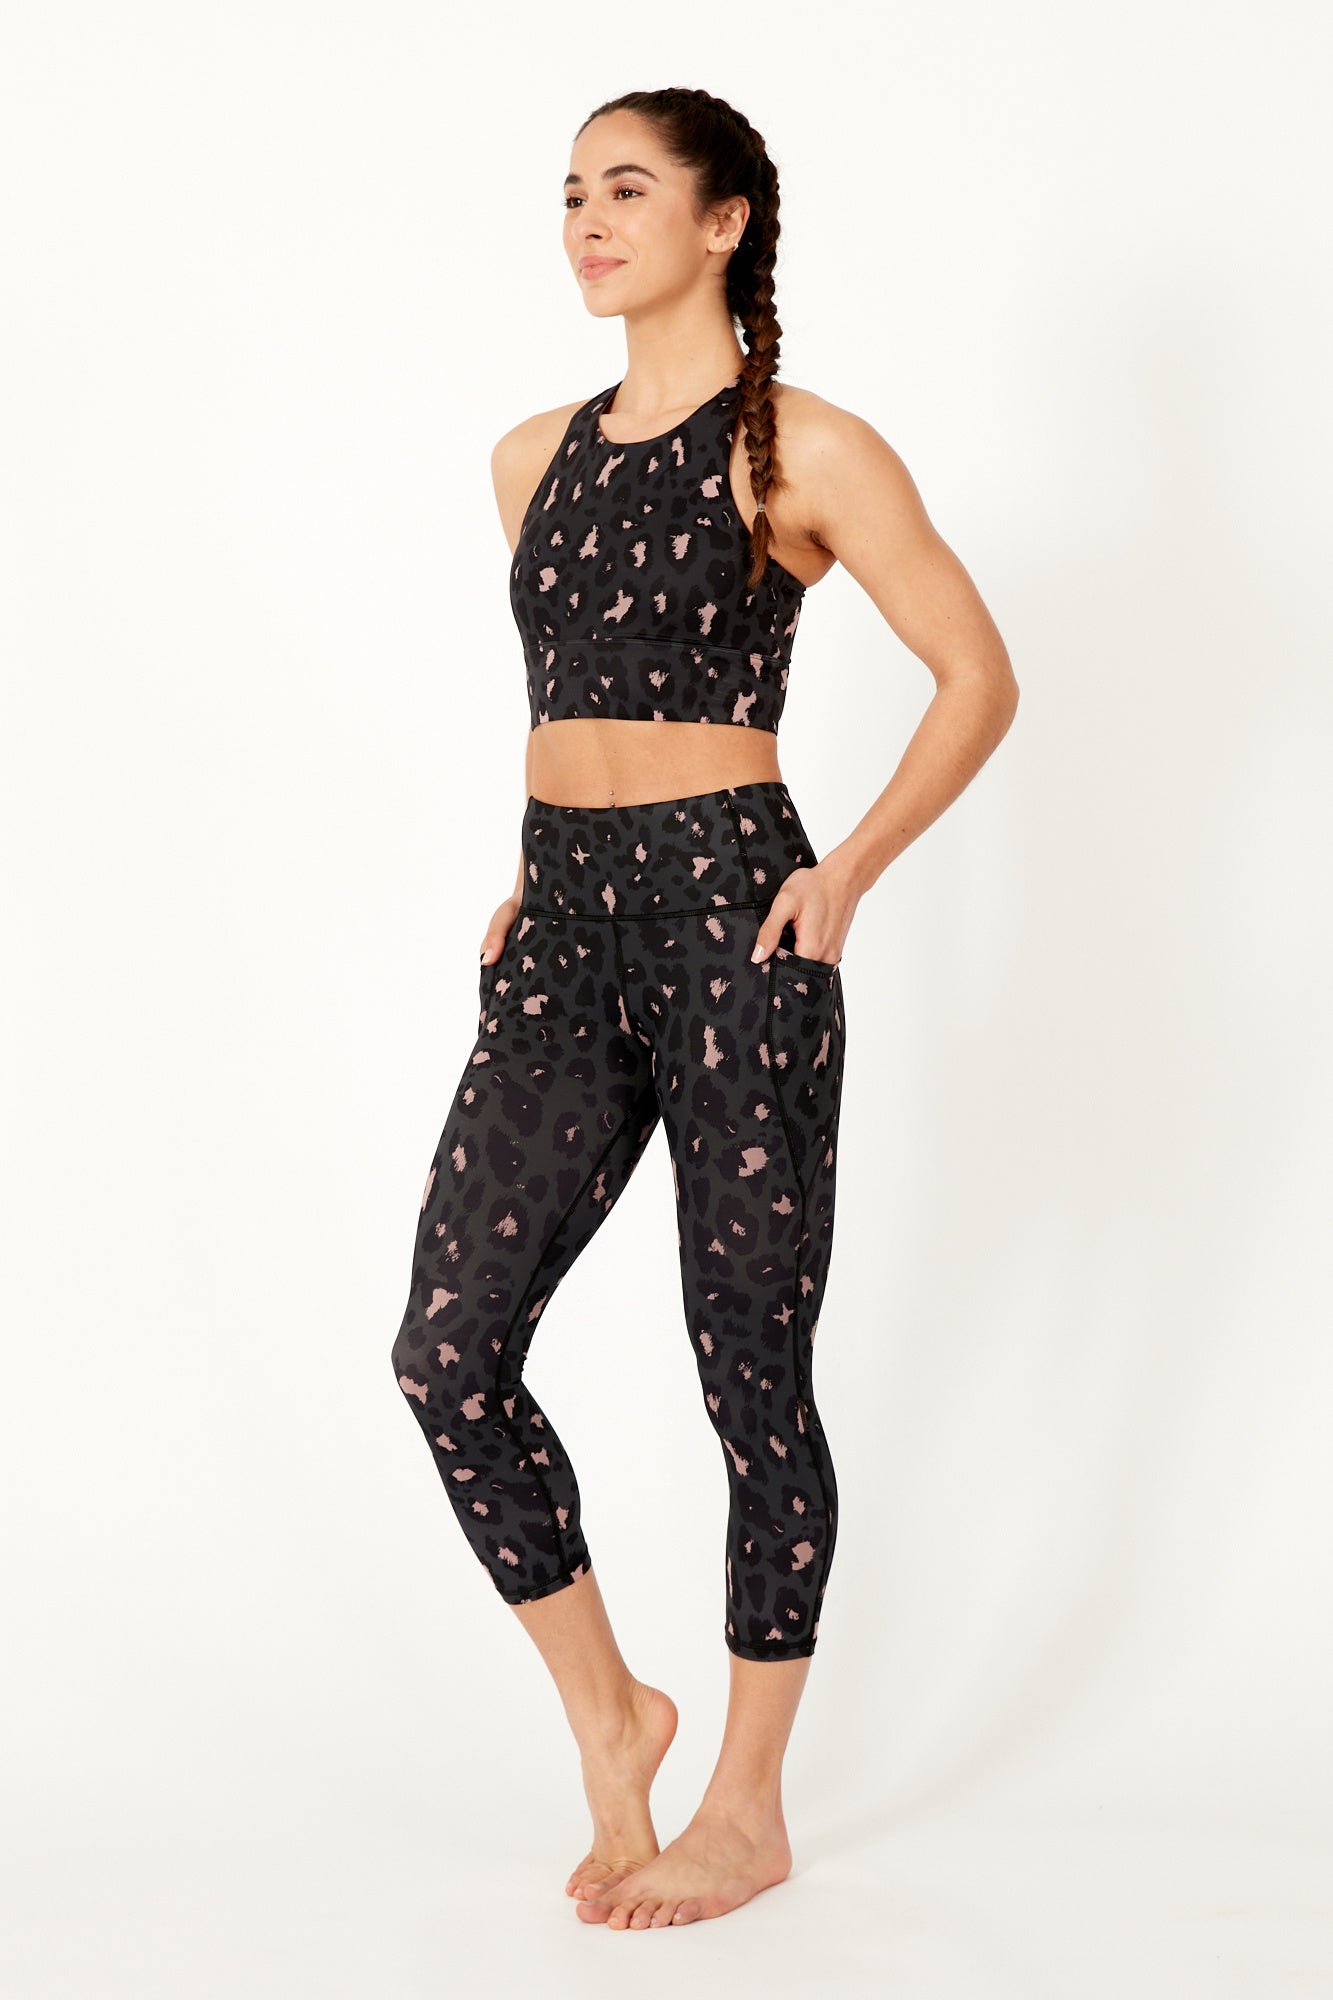 Pieces high waisted leggings in floral print